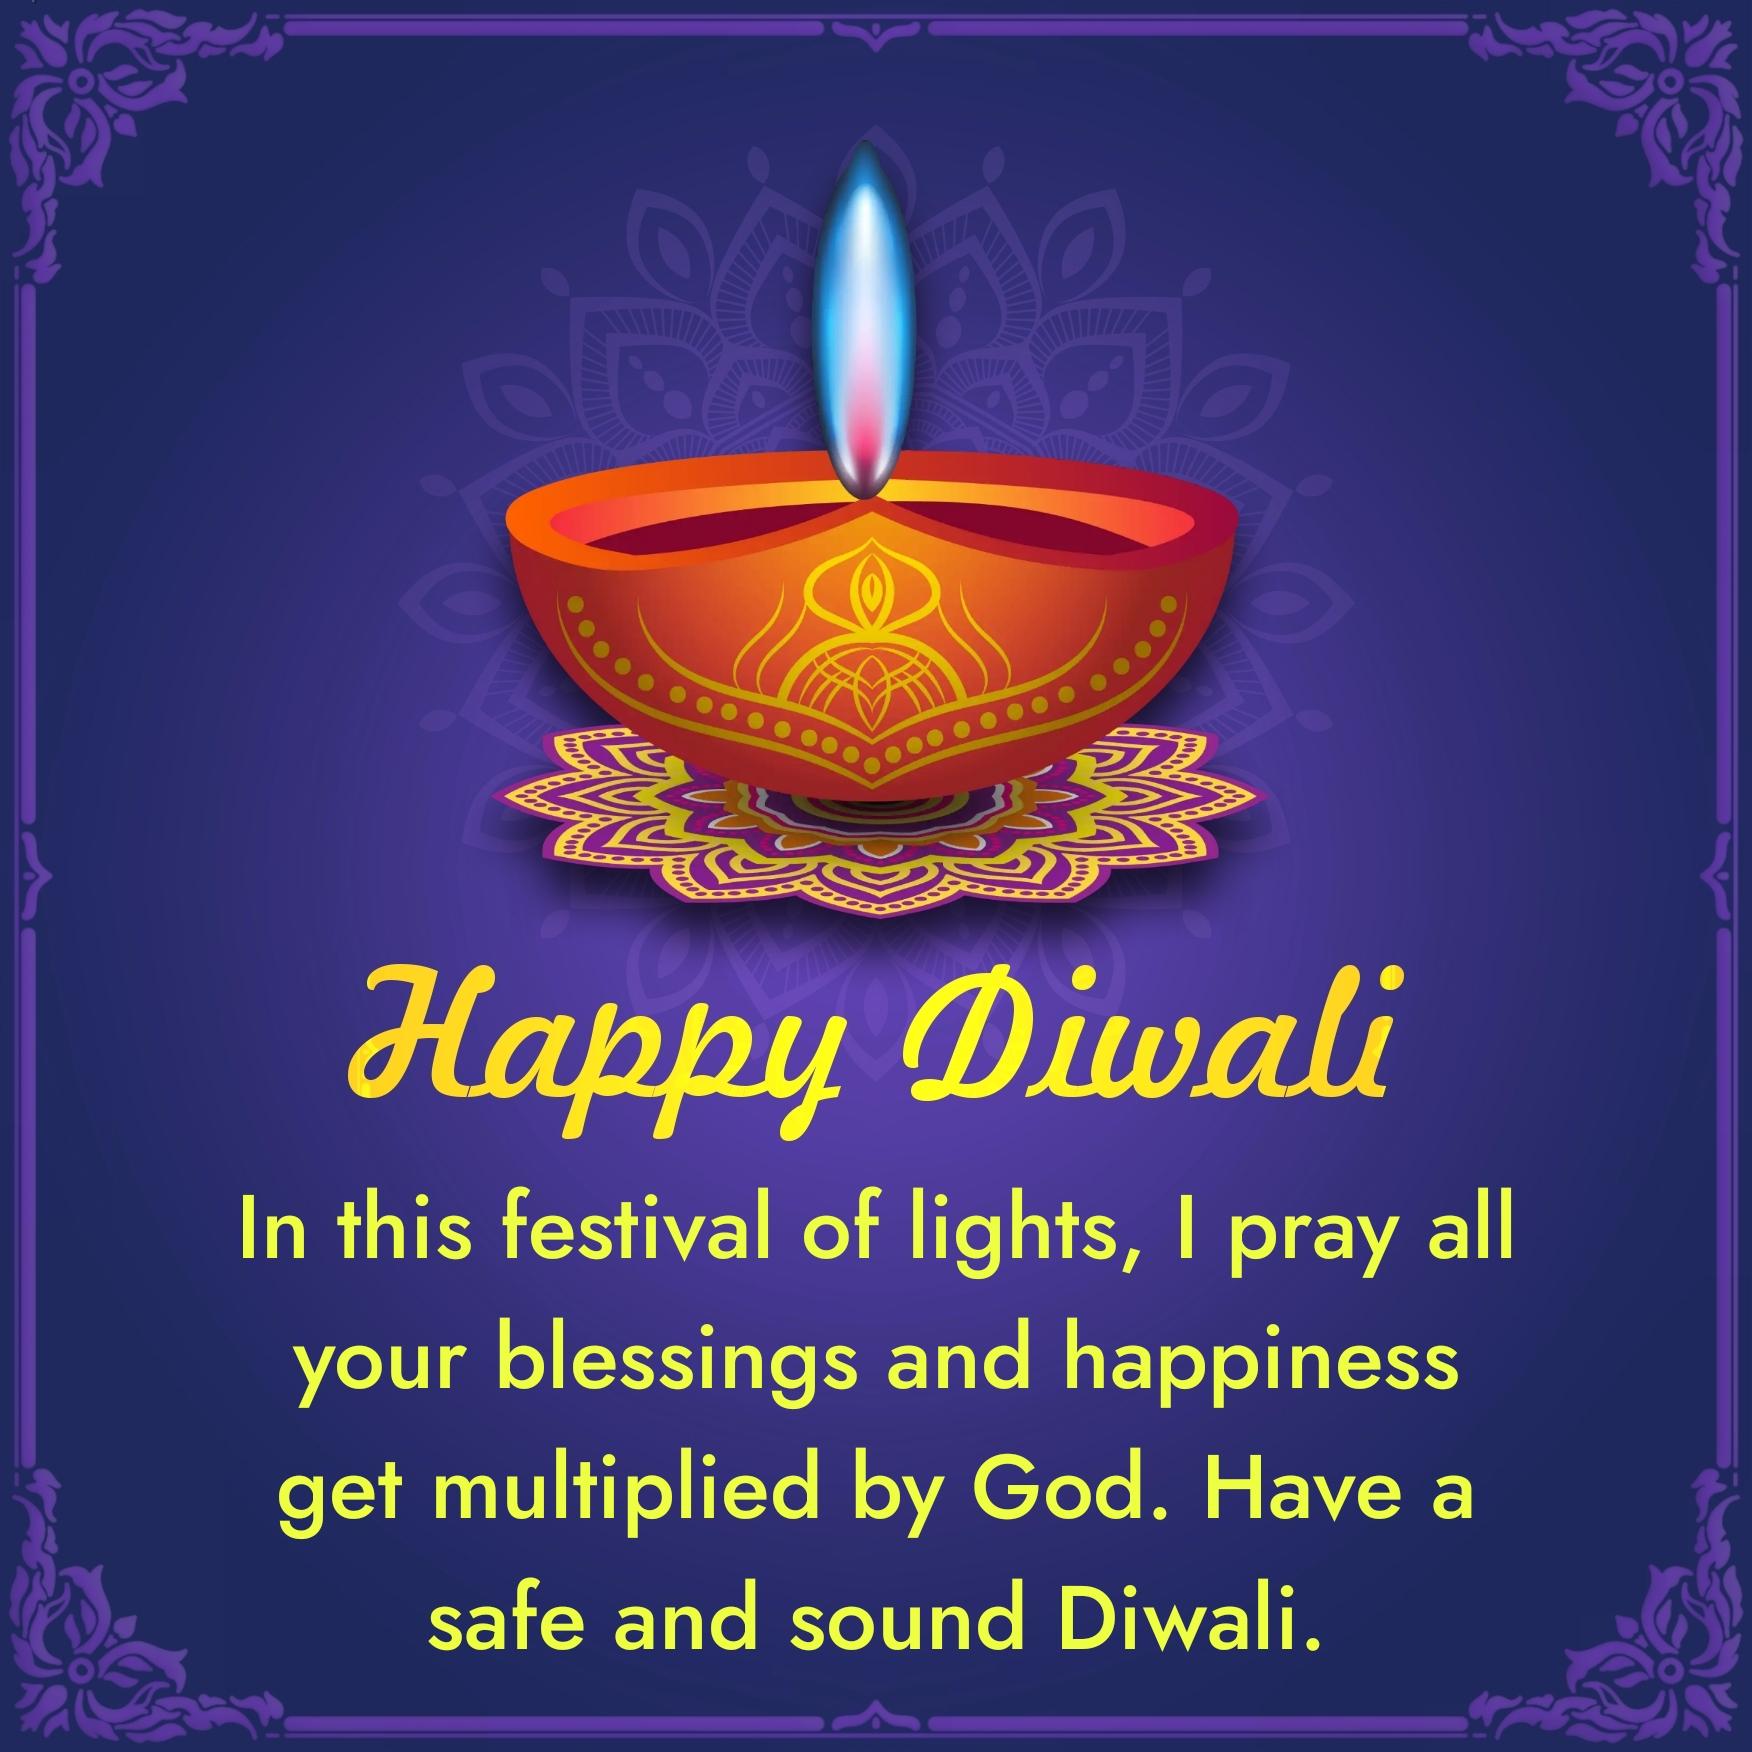 In this festival of lights I pray all your blessings and happiness